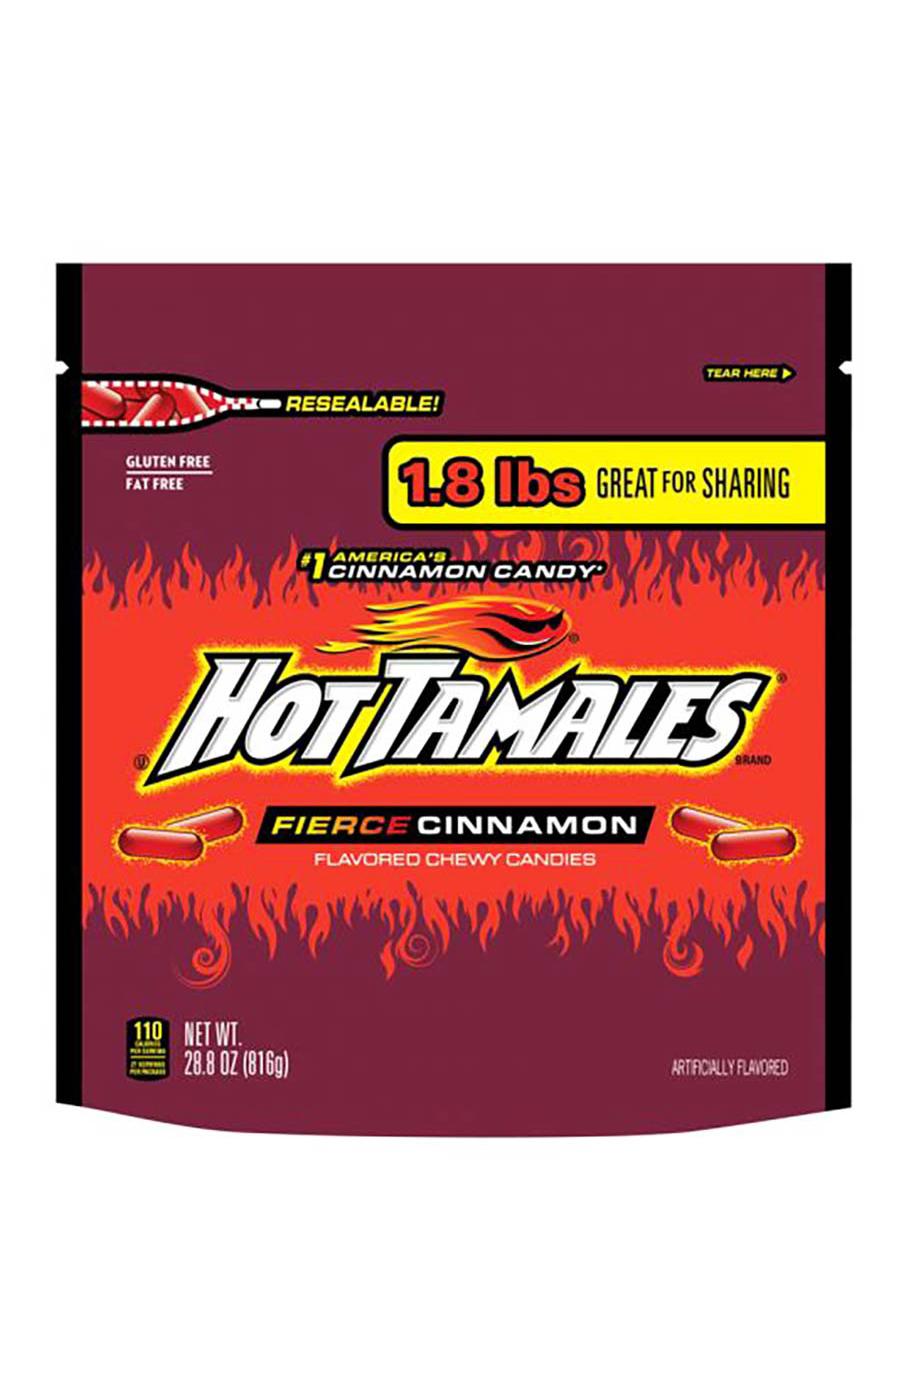 Hot Tamales Fierce Cinnamon Chewy Candy; image 1 of 2